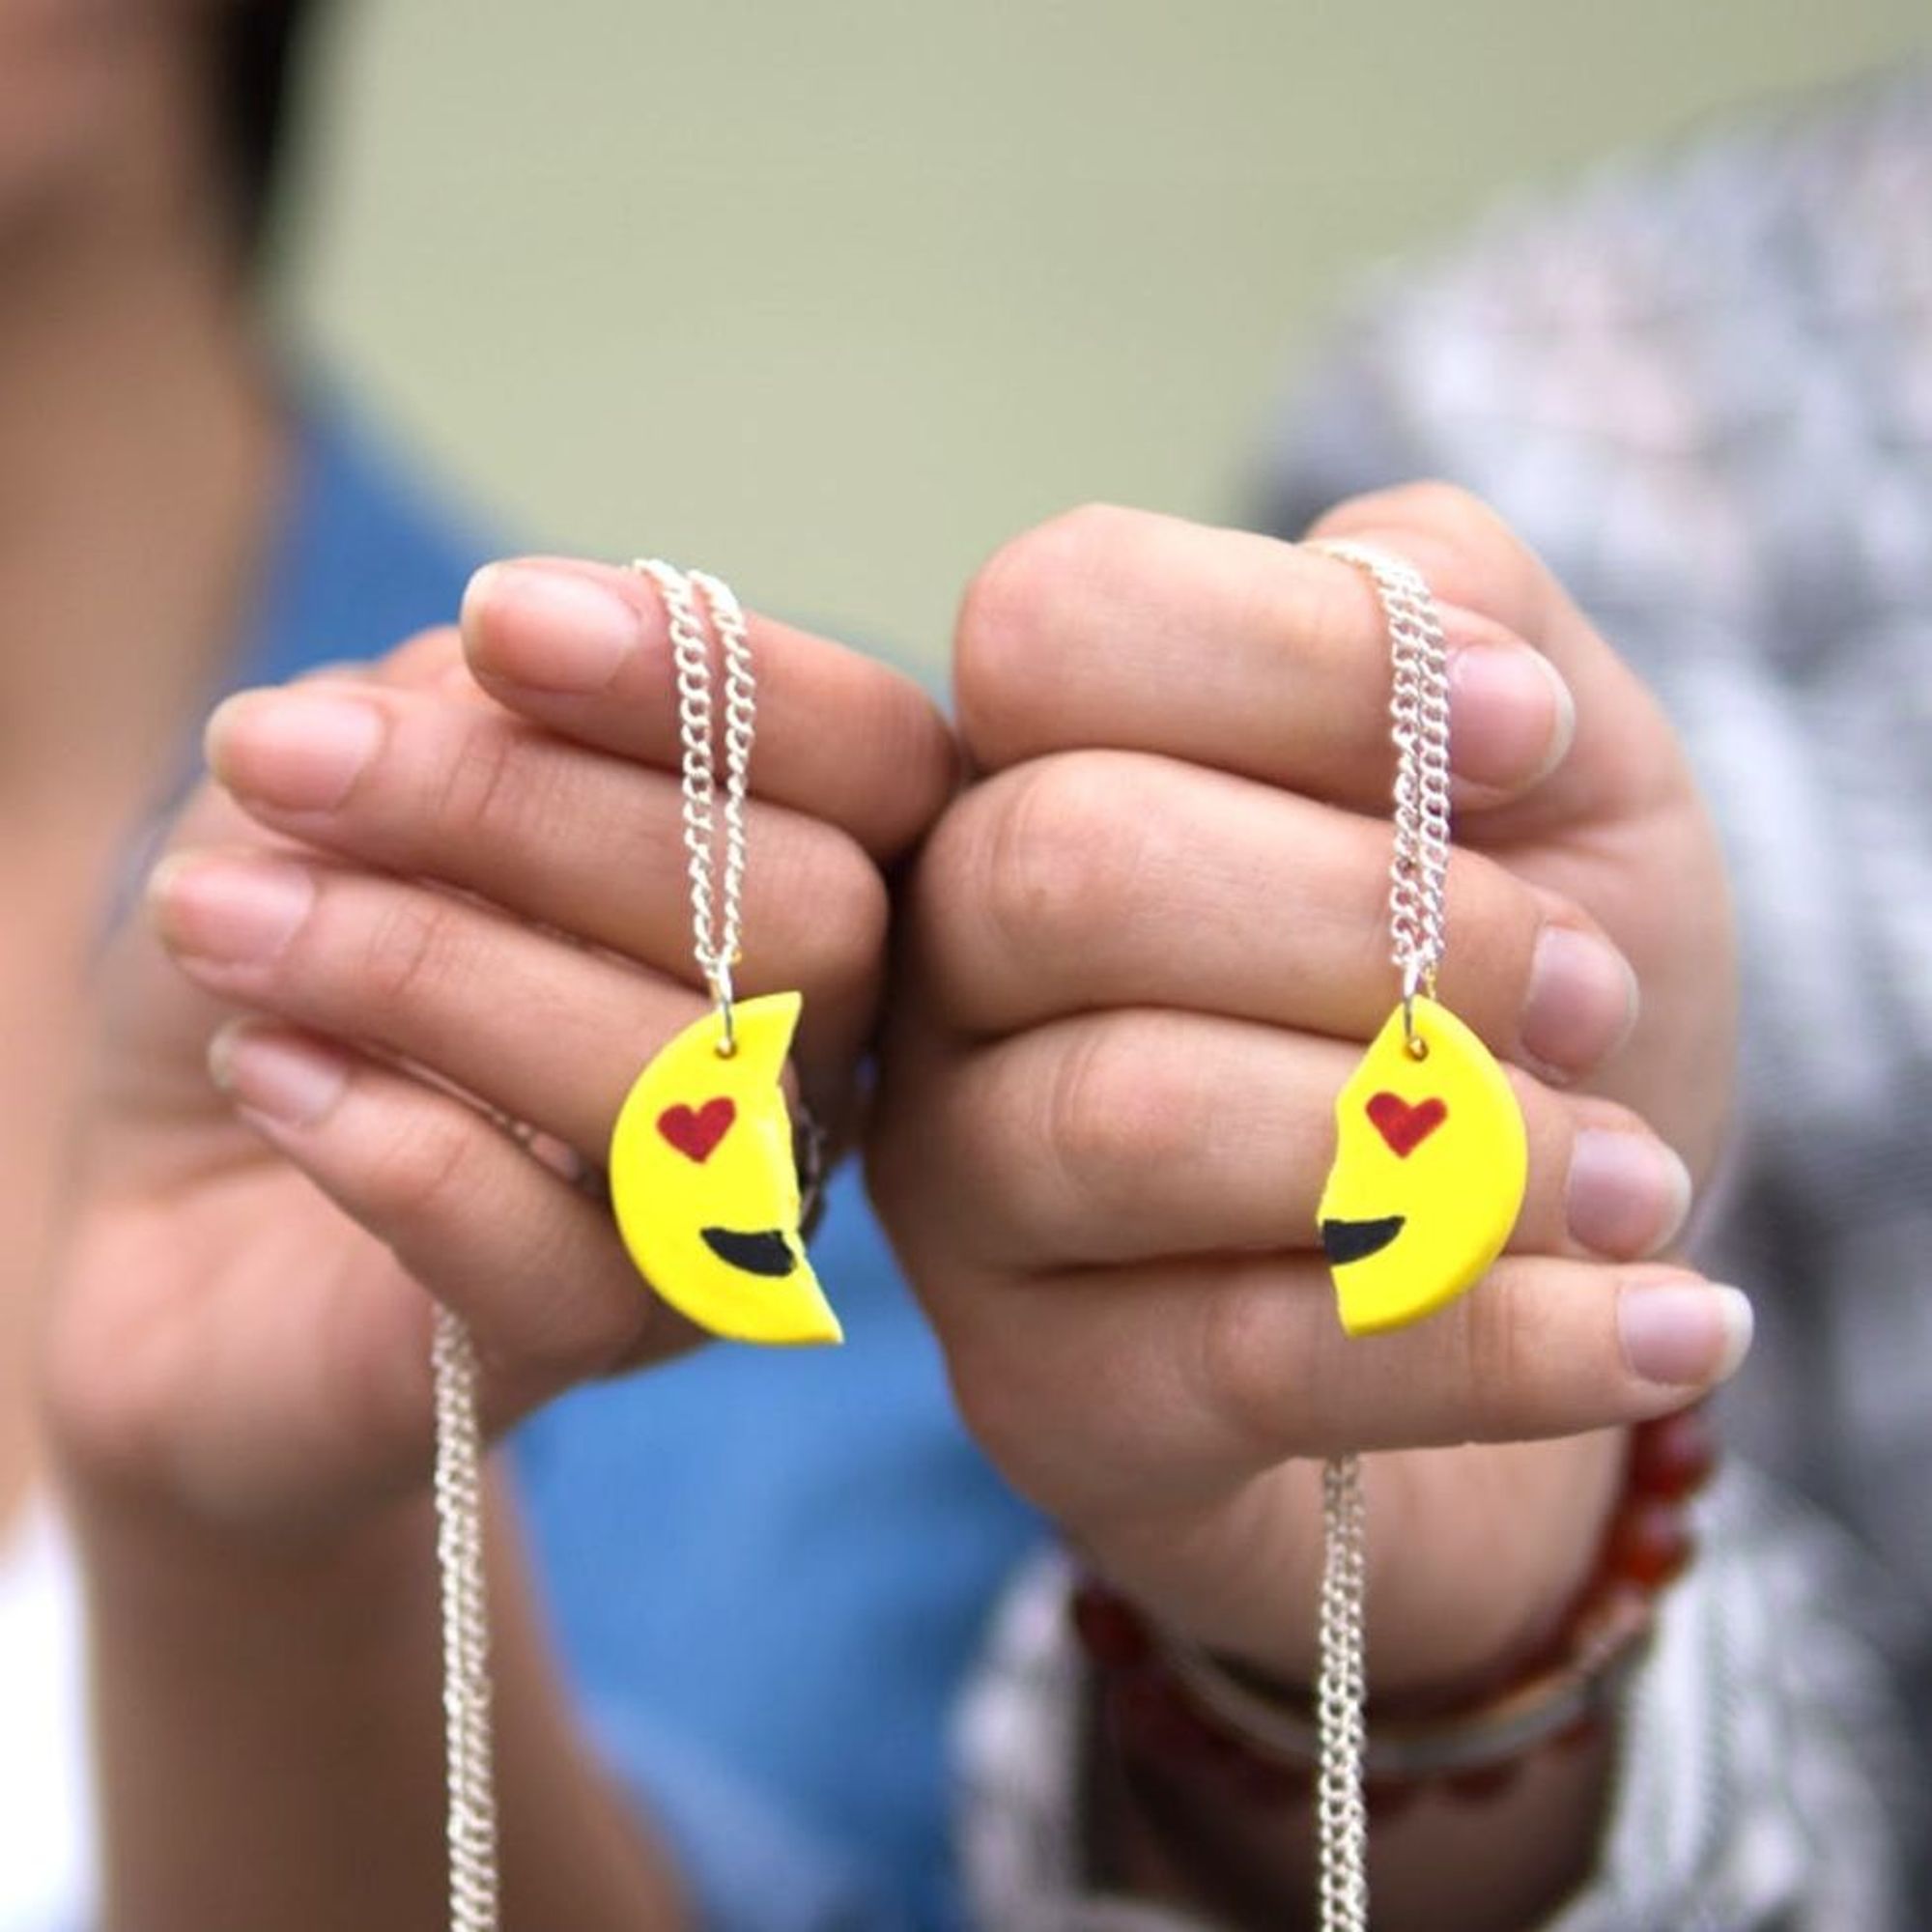 Show Your BFF Some Love With DIY Emoji Necklaces - Brit + Co